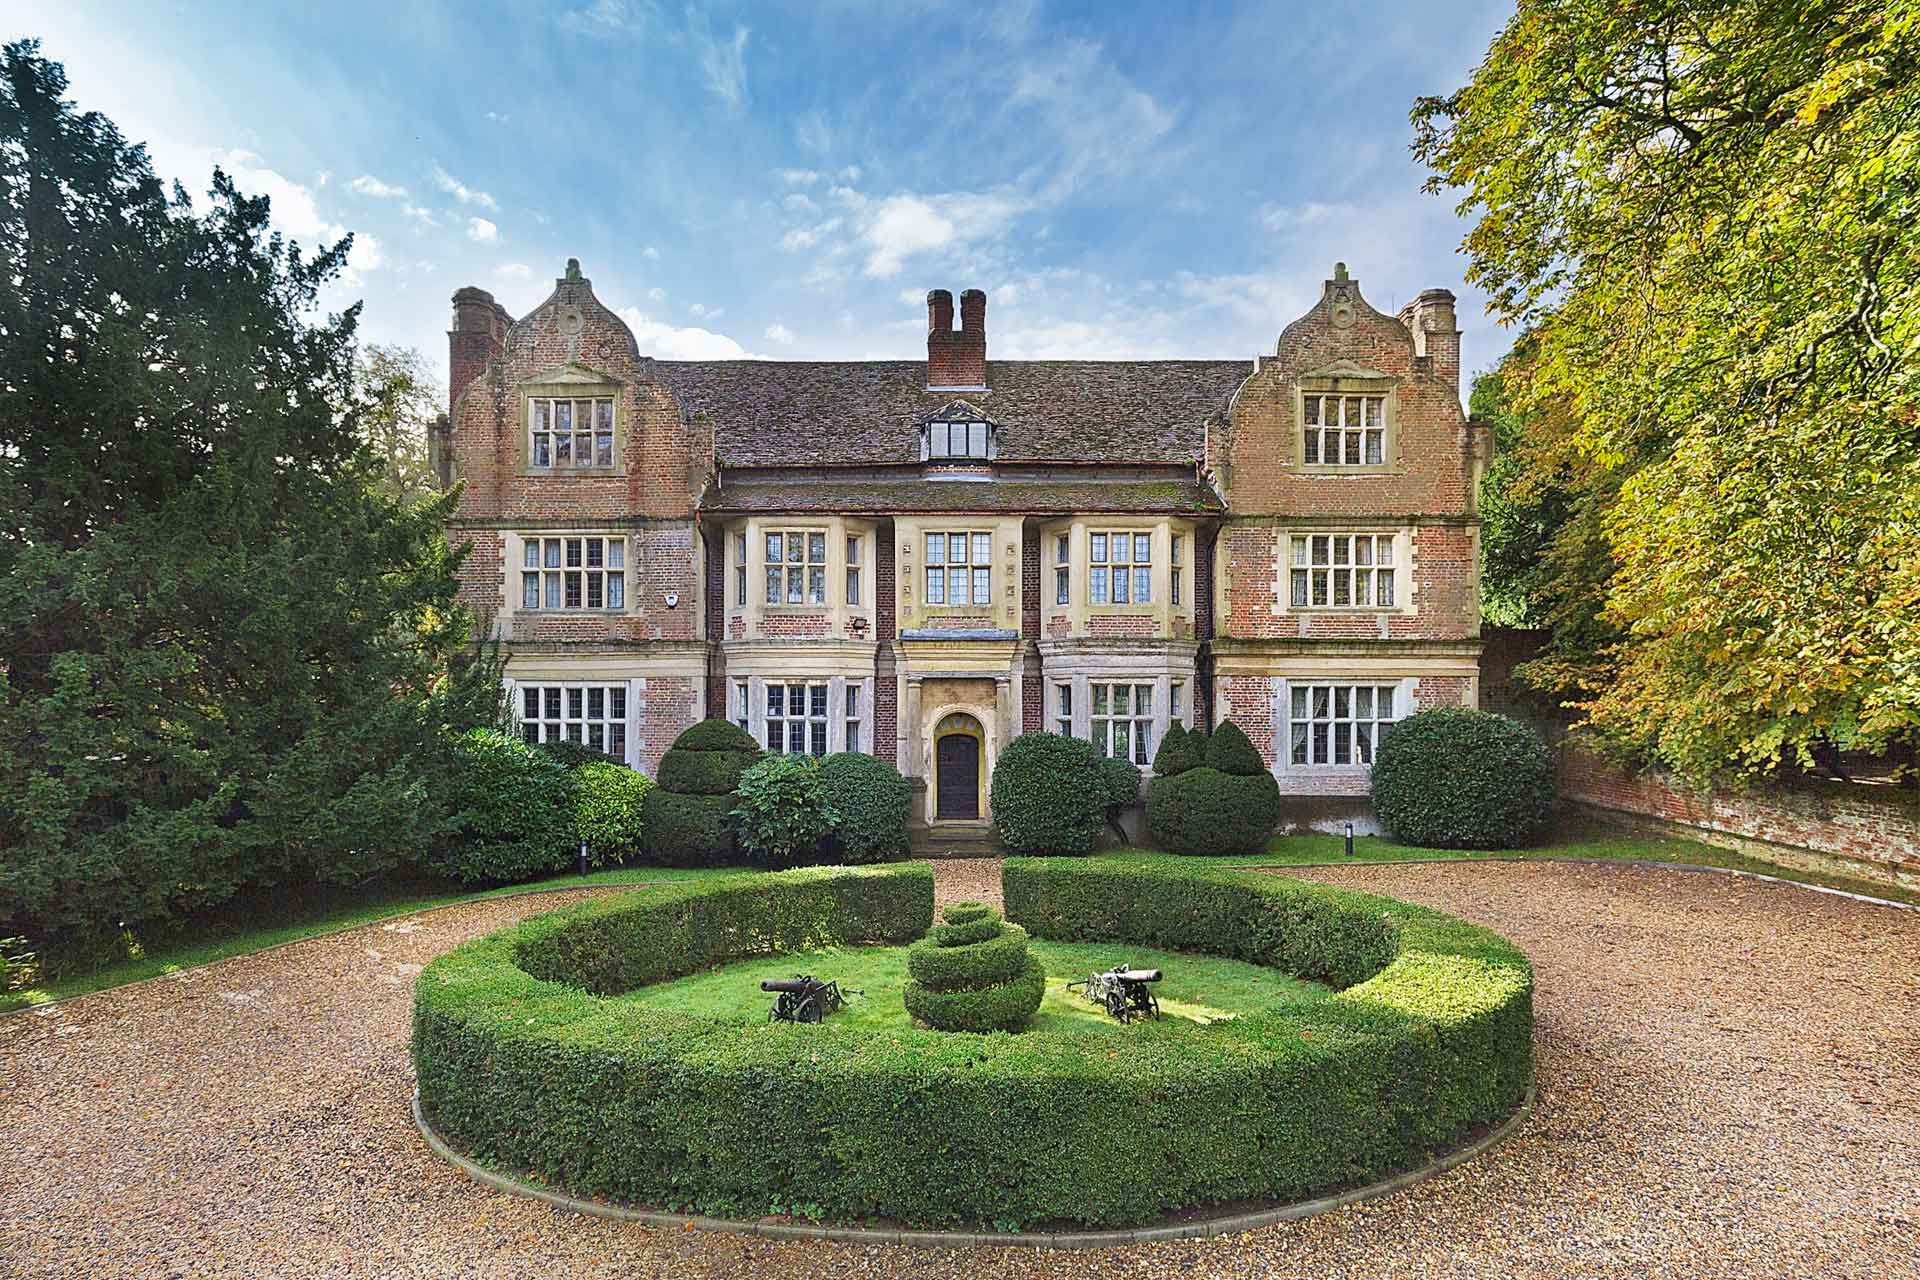 Country manor with Jacobean architecture and a central circular hedge in the driveway.